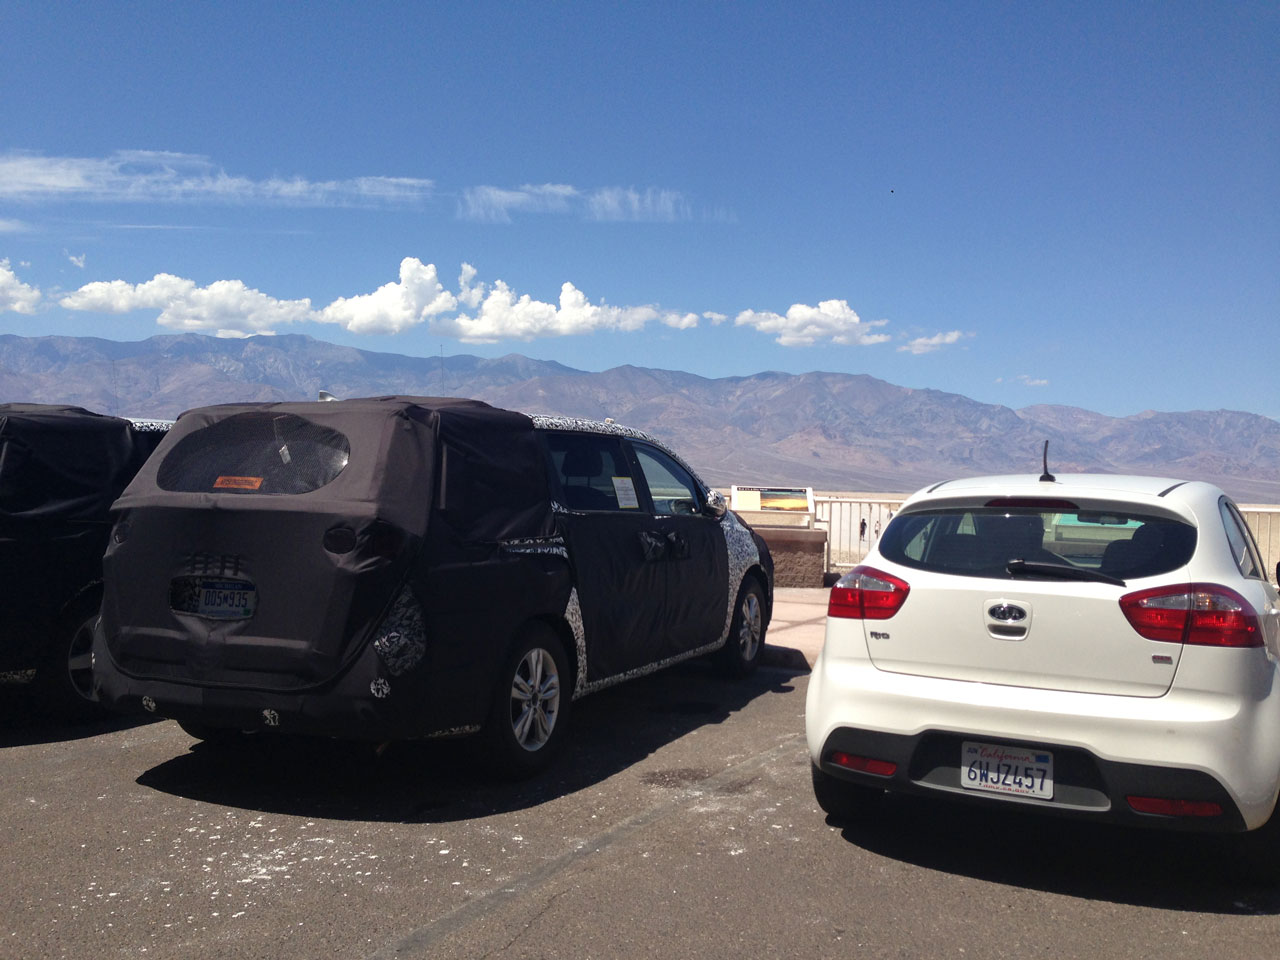 Disguised prototype car testing at Badwater Basin